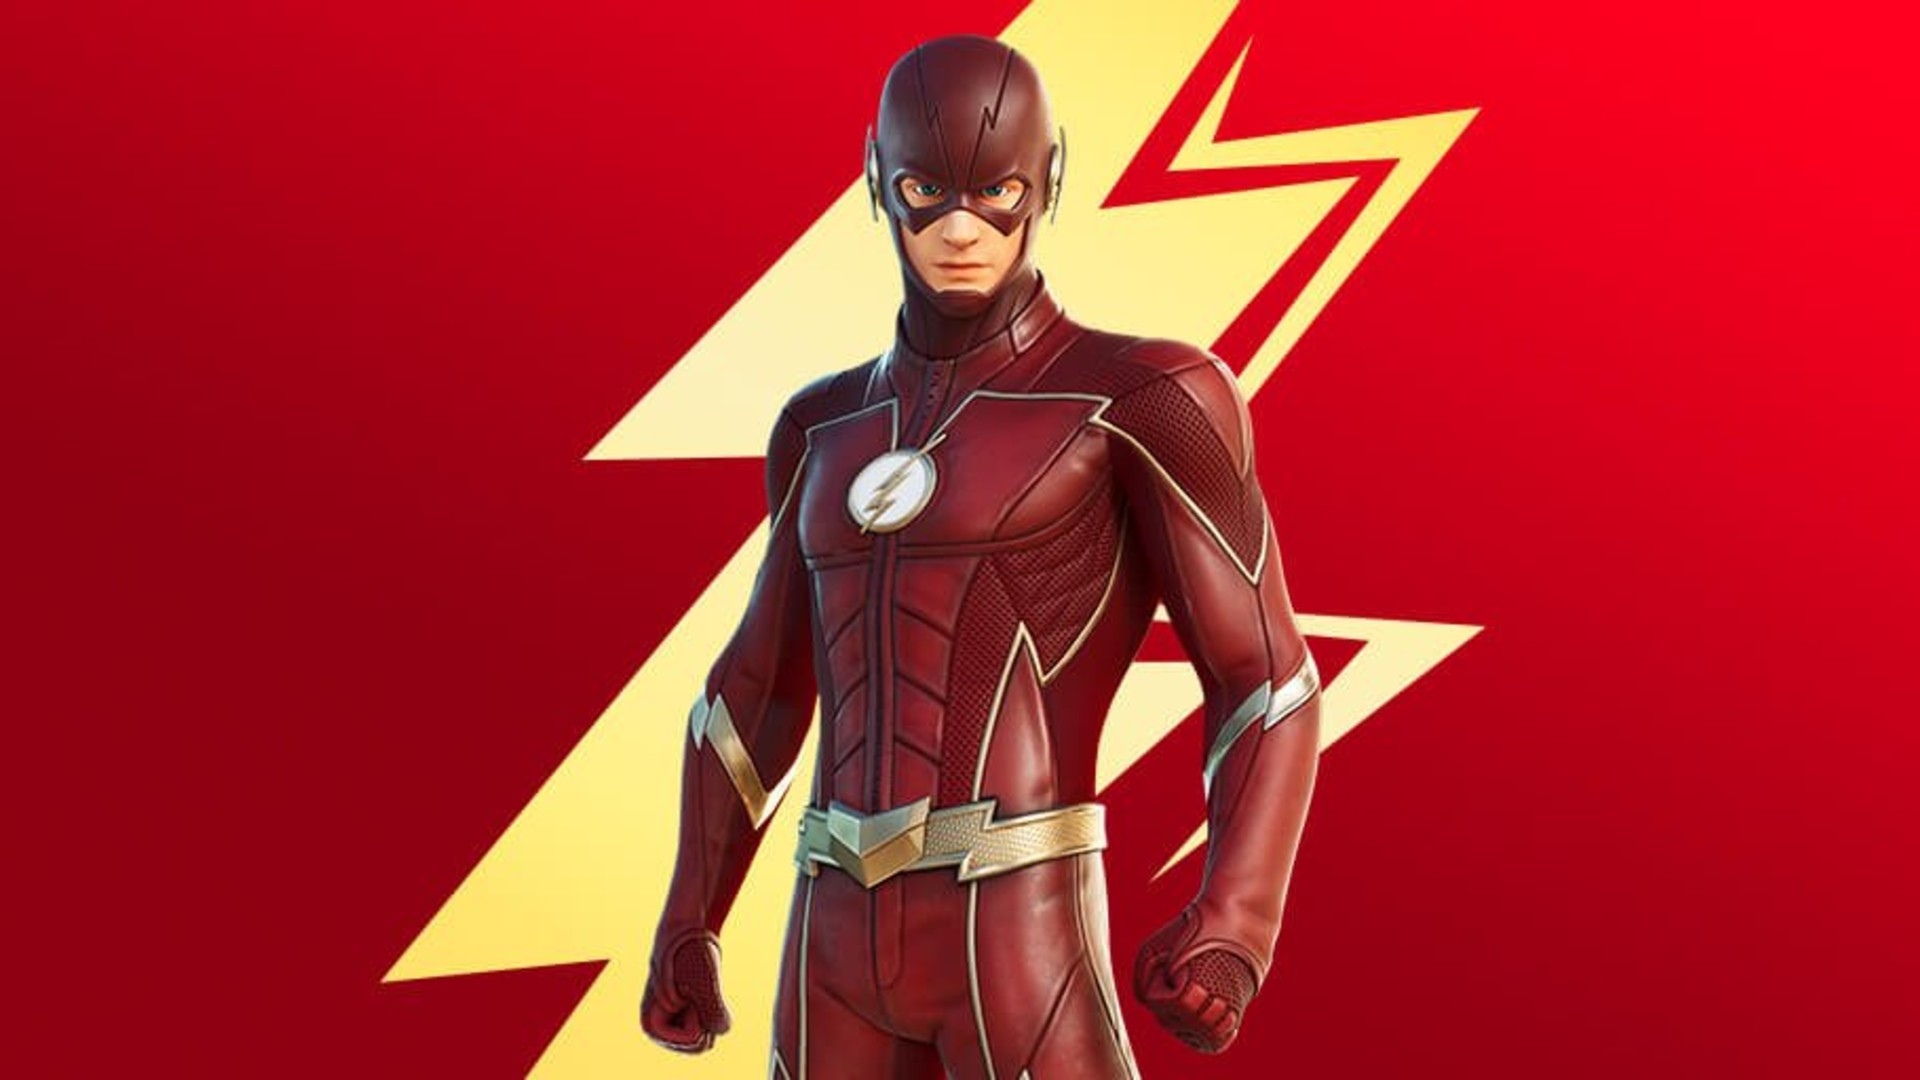  The Flash is coming to Fortnite, here's how to get the skin 